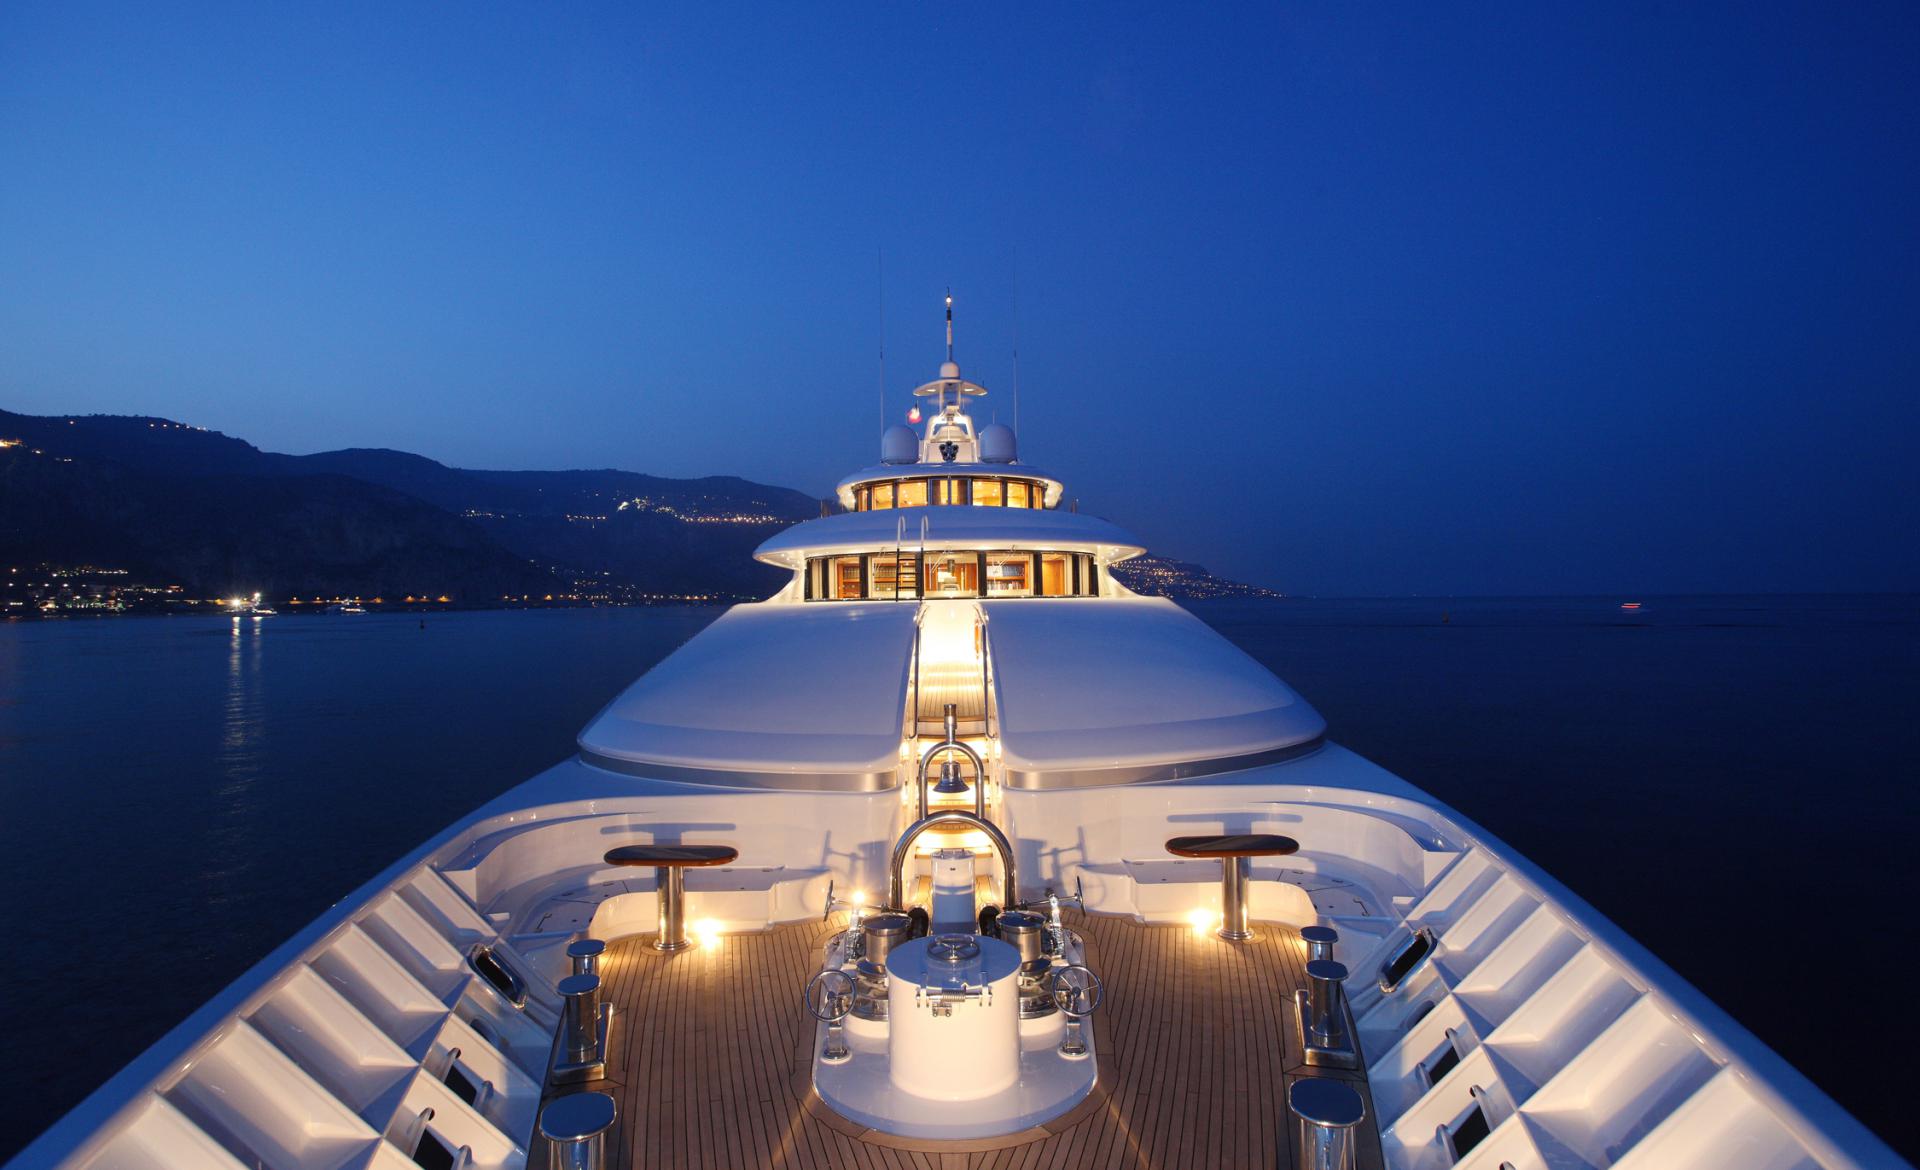 luxury yachts in capri right now